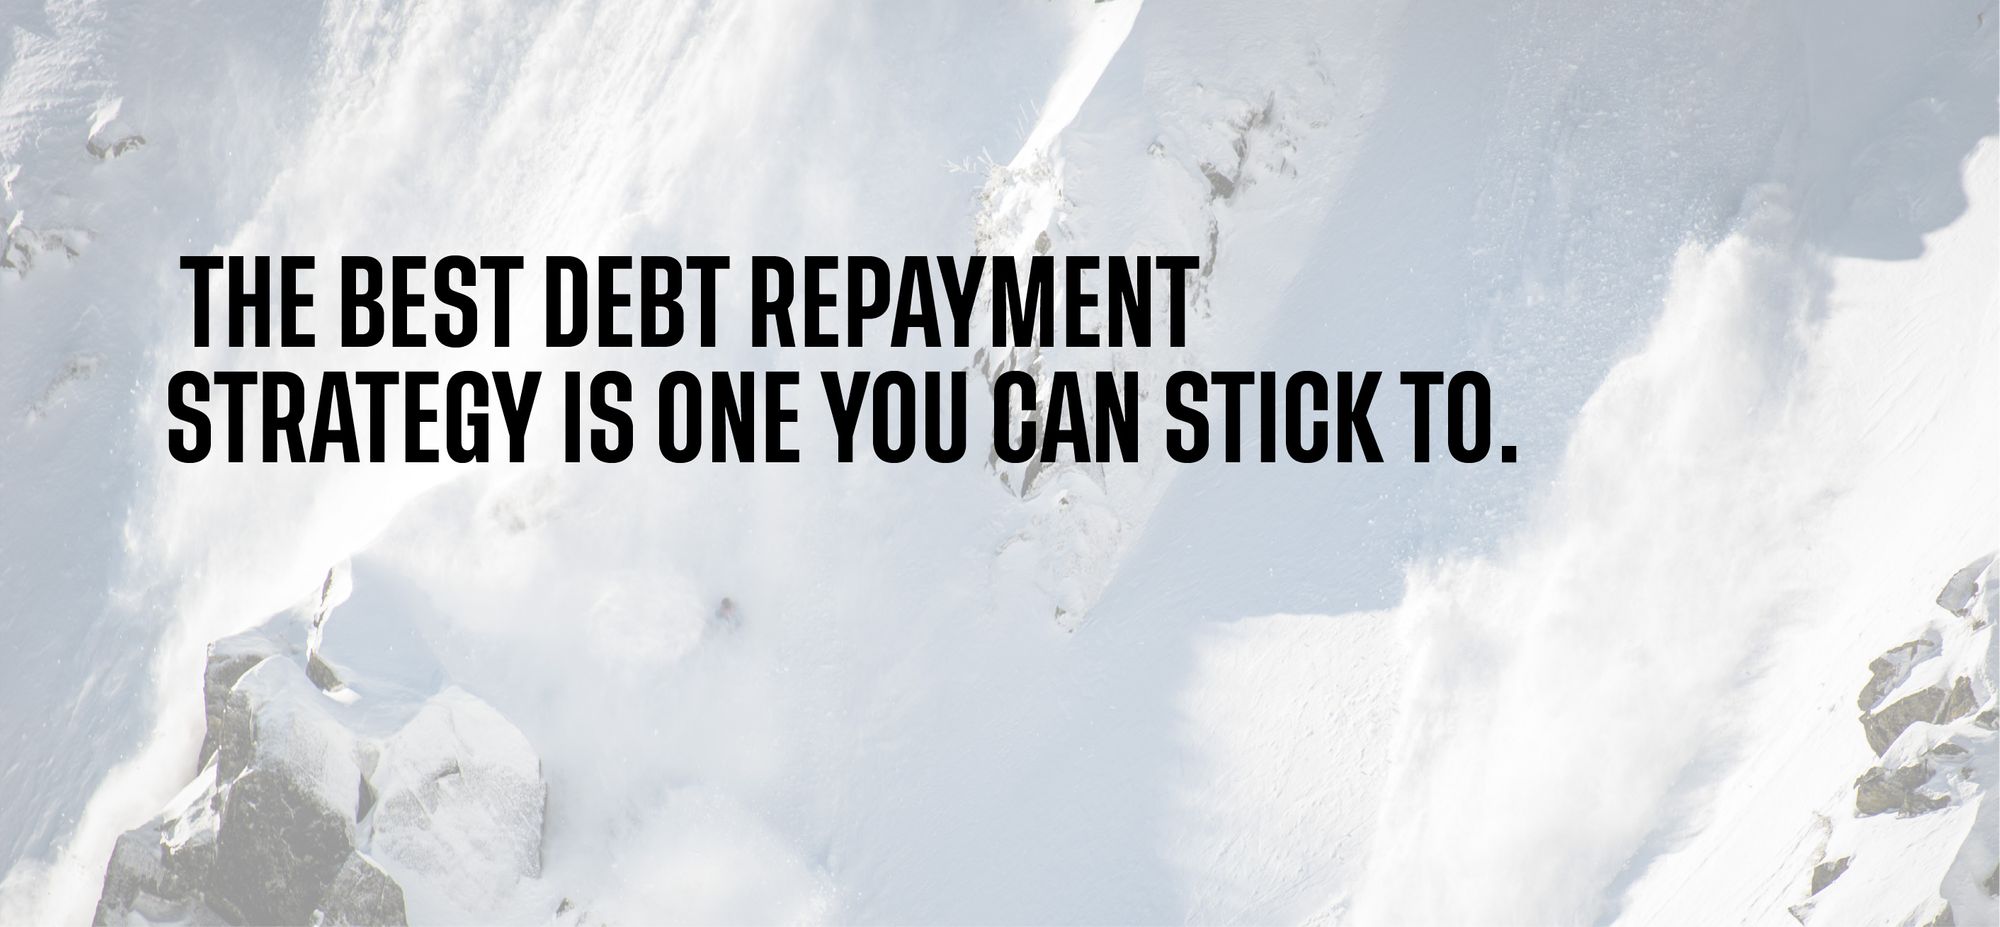 the best debt repayment strategy is one you can stick to.